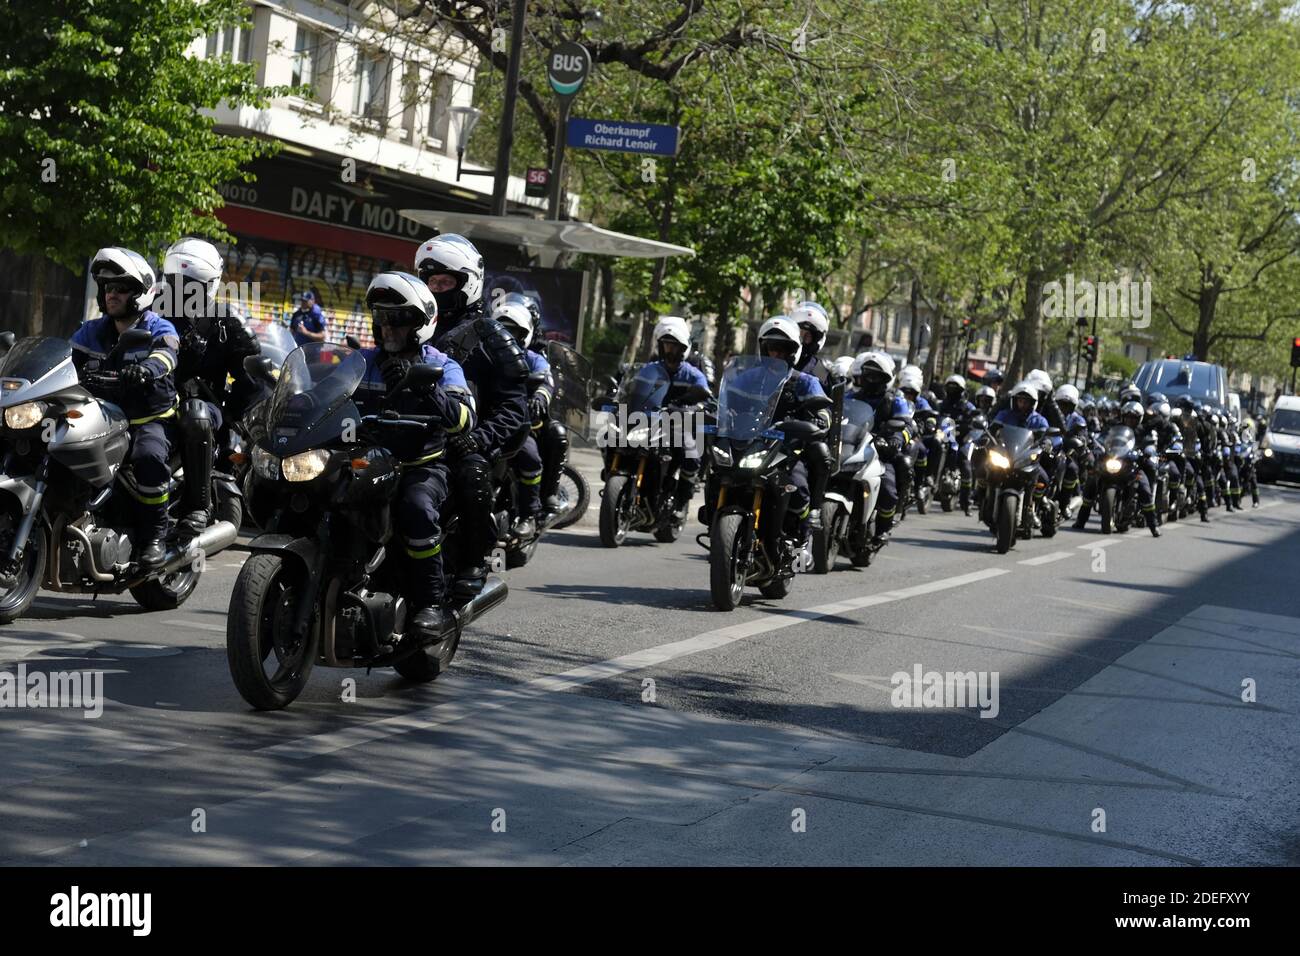 French Police special unit riding on motorcycles in a line during an  anti-government demonstration called by the "yellow vests" (gilets jaunes)  movement in Paris during the 'Act XXIII' demonstration the 23th consecutive